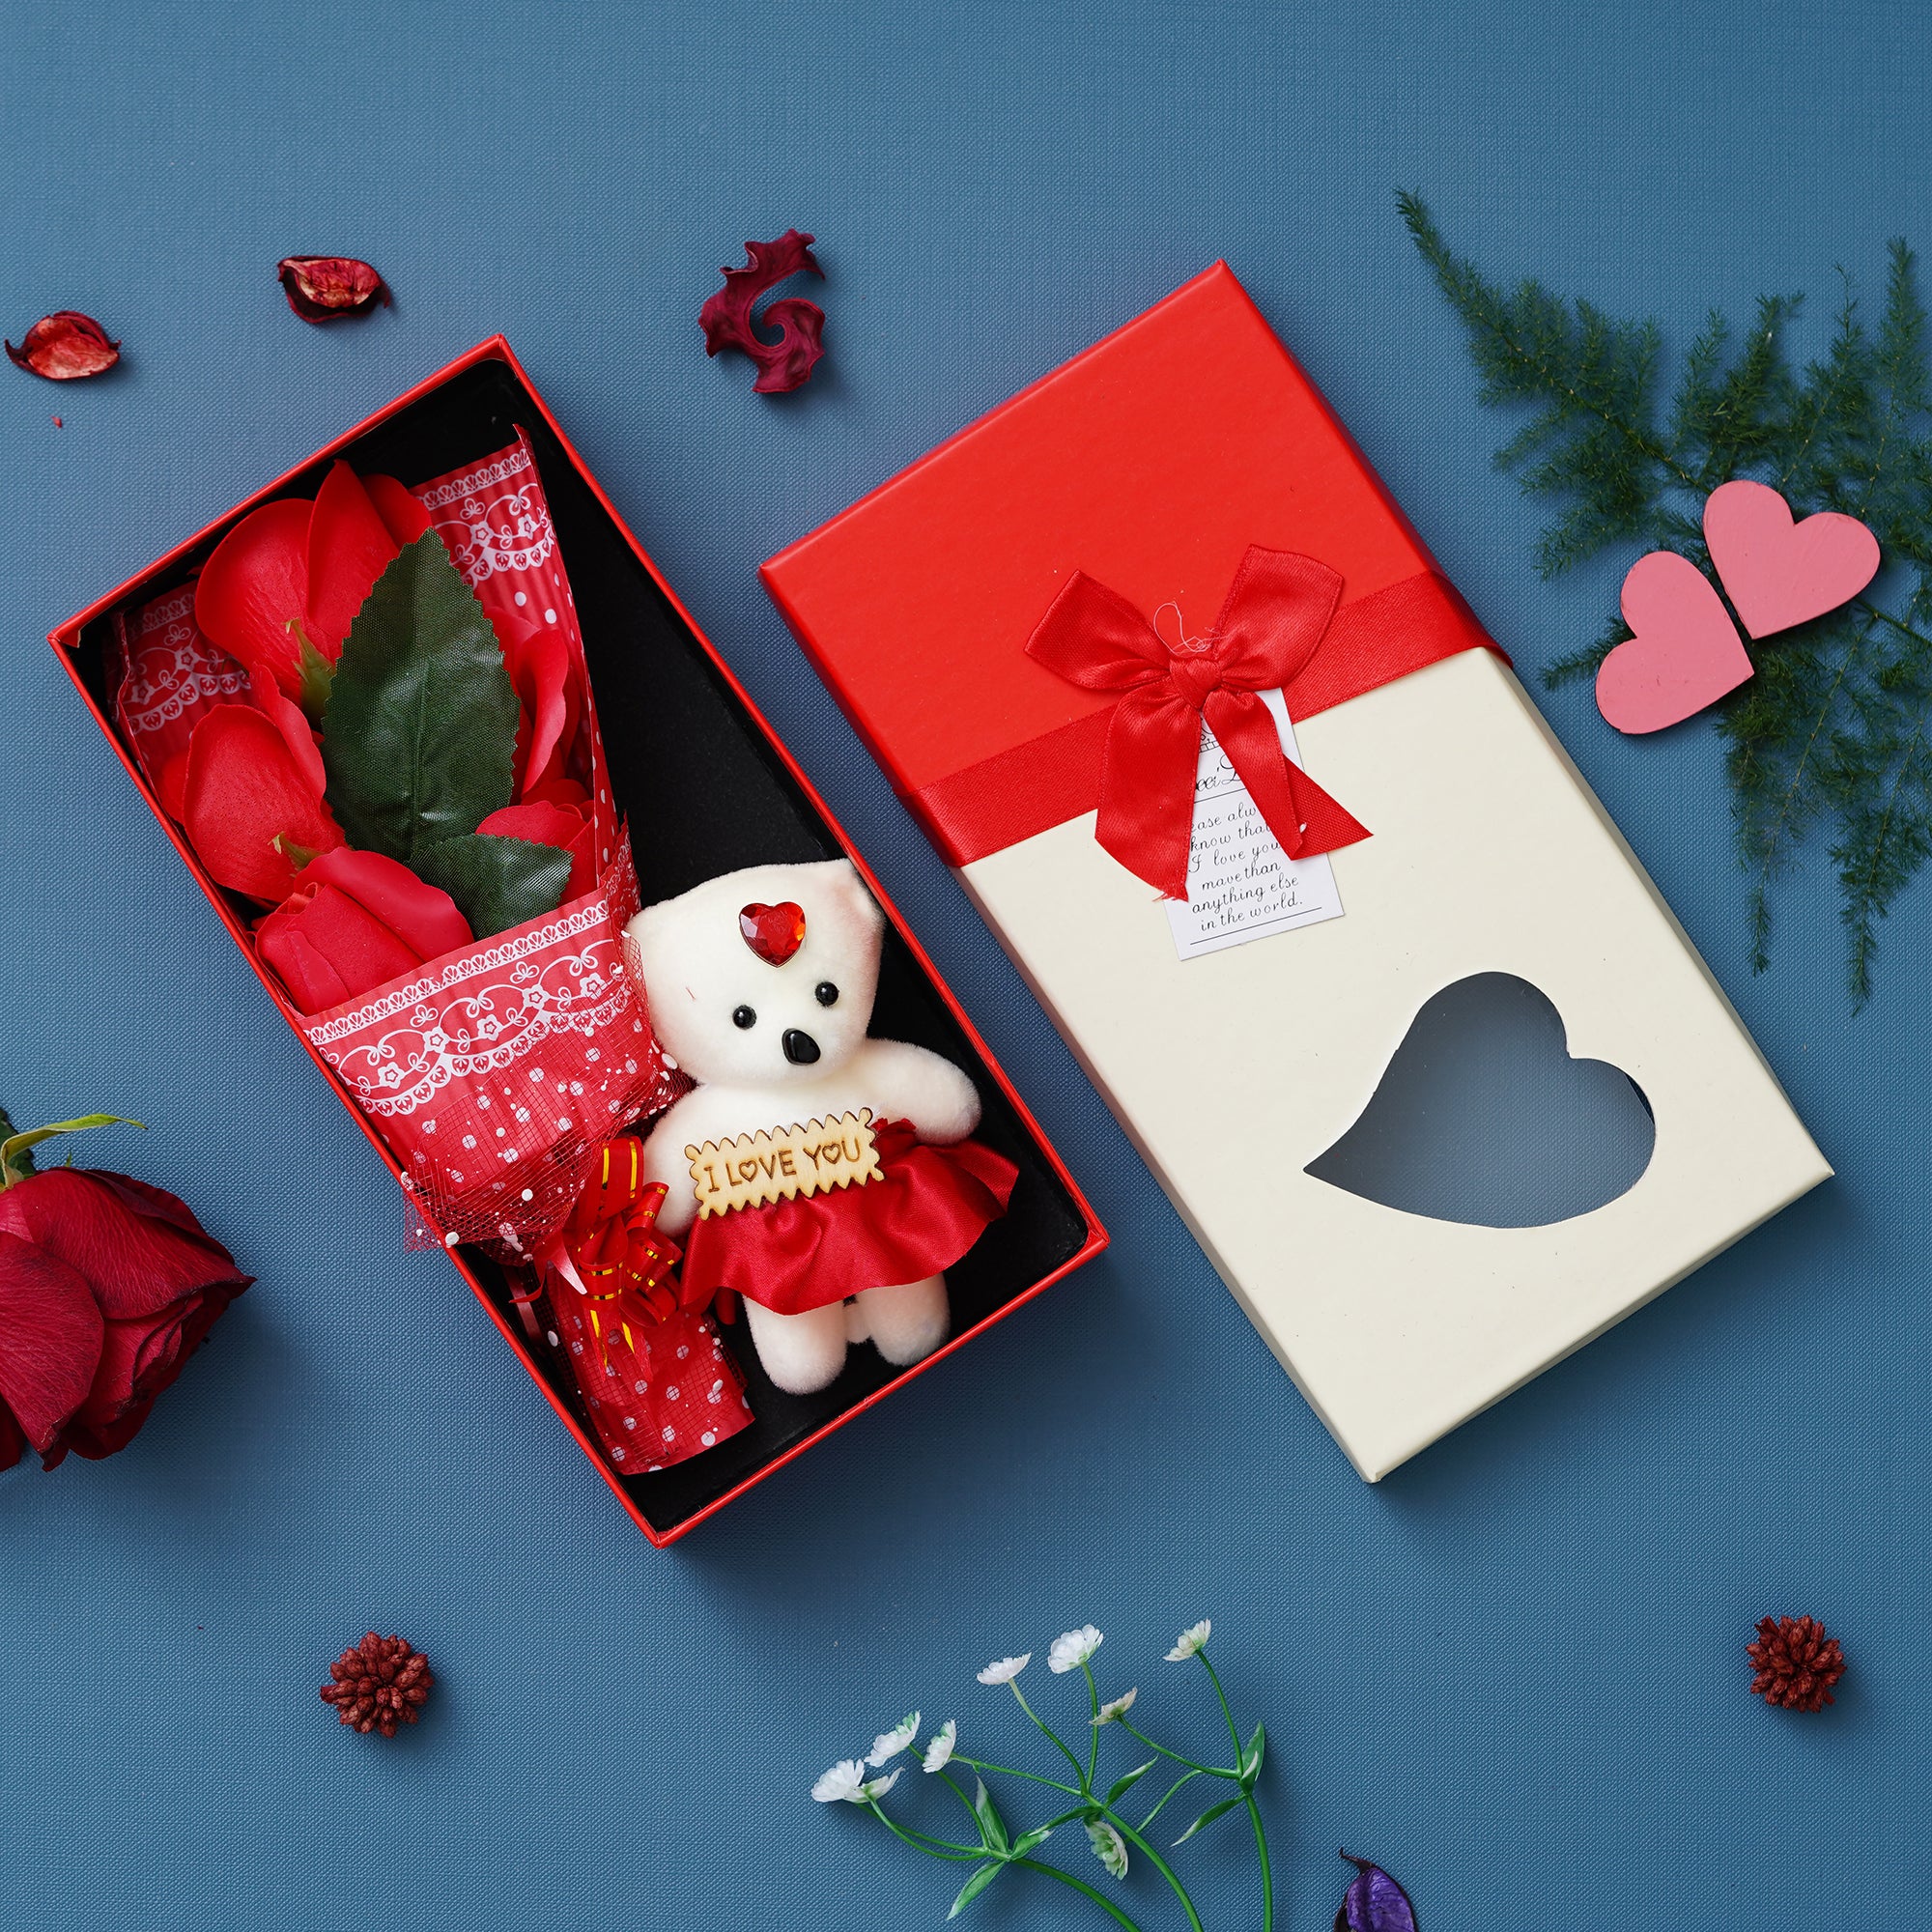 Valentine Combo of Pack of 8 Love Gift Cards, "20 Reasons Why I Love You" Printed on Little Hearts Wooden Gift Set, Red Roses Bouquet and White, Red Teddy Bear Valentine's Rectangle Shaped Gift Box 5